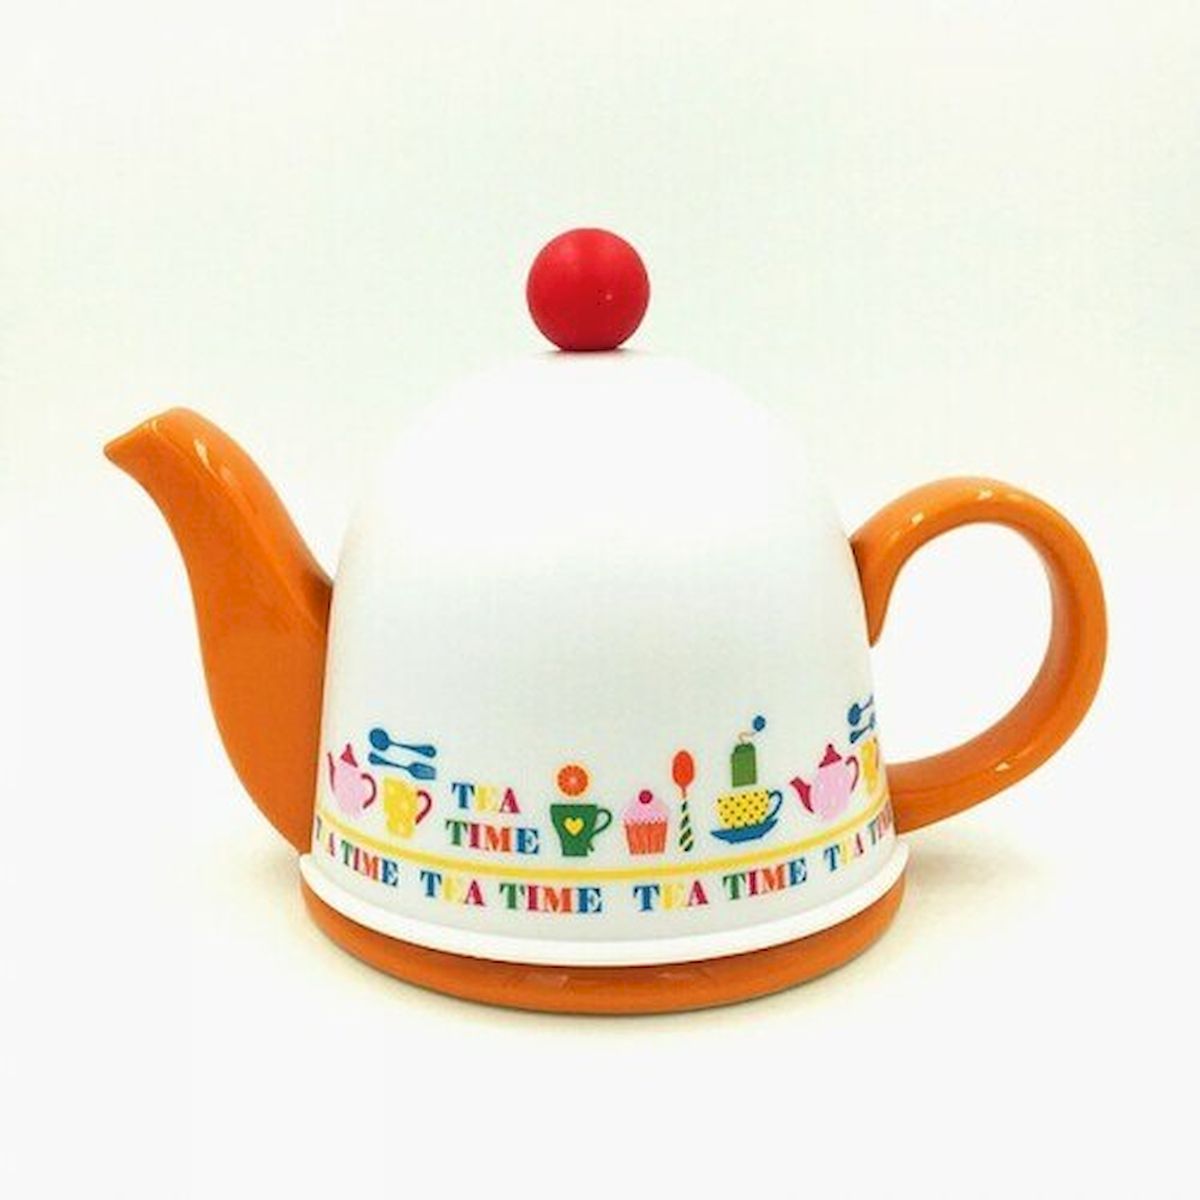 Picture of Mr. MJs HO-SFYT027S-ORANGE Colourful Tea Time Cover & Orange Teapot with Infuser